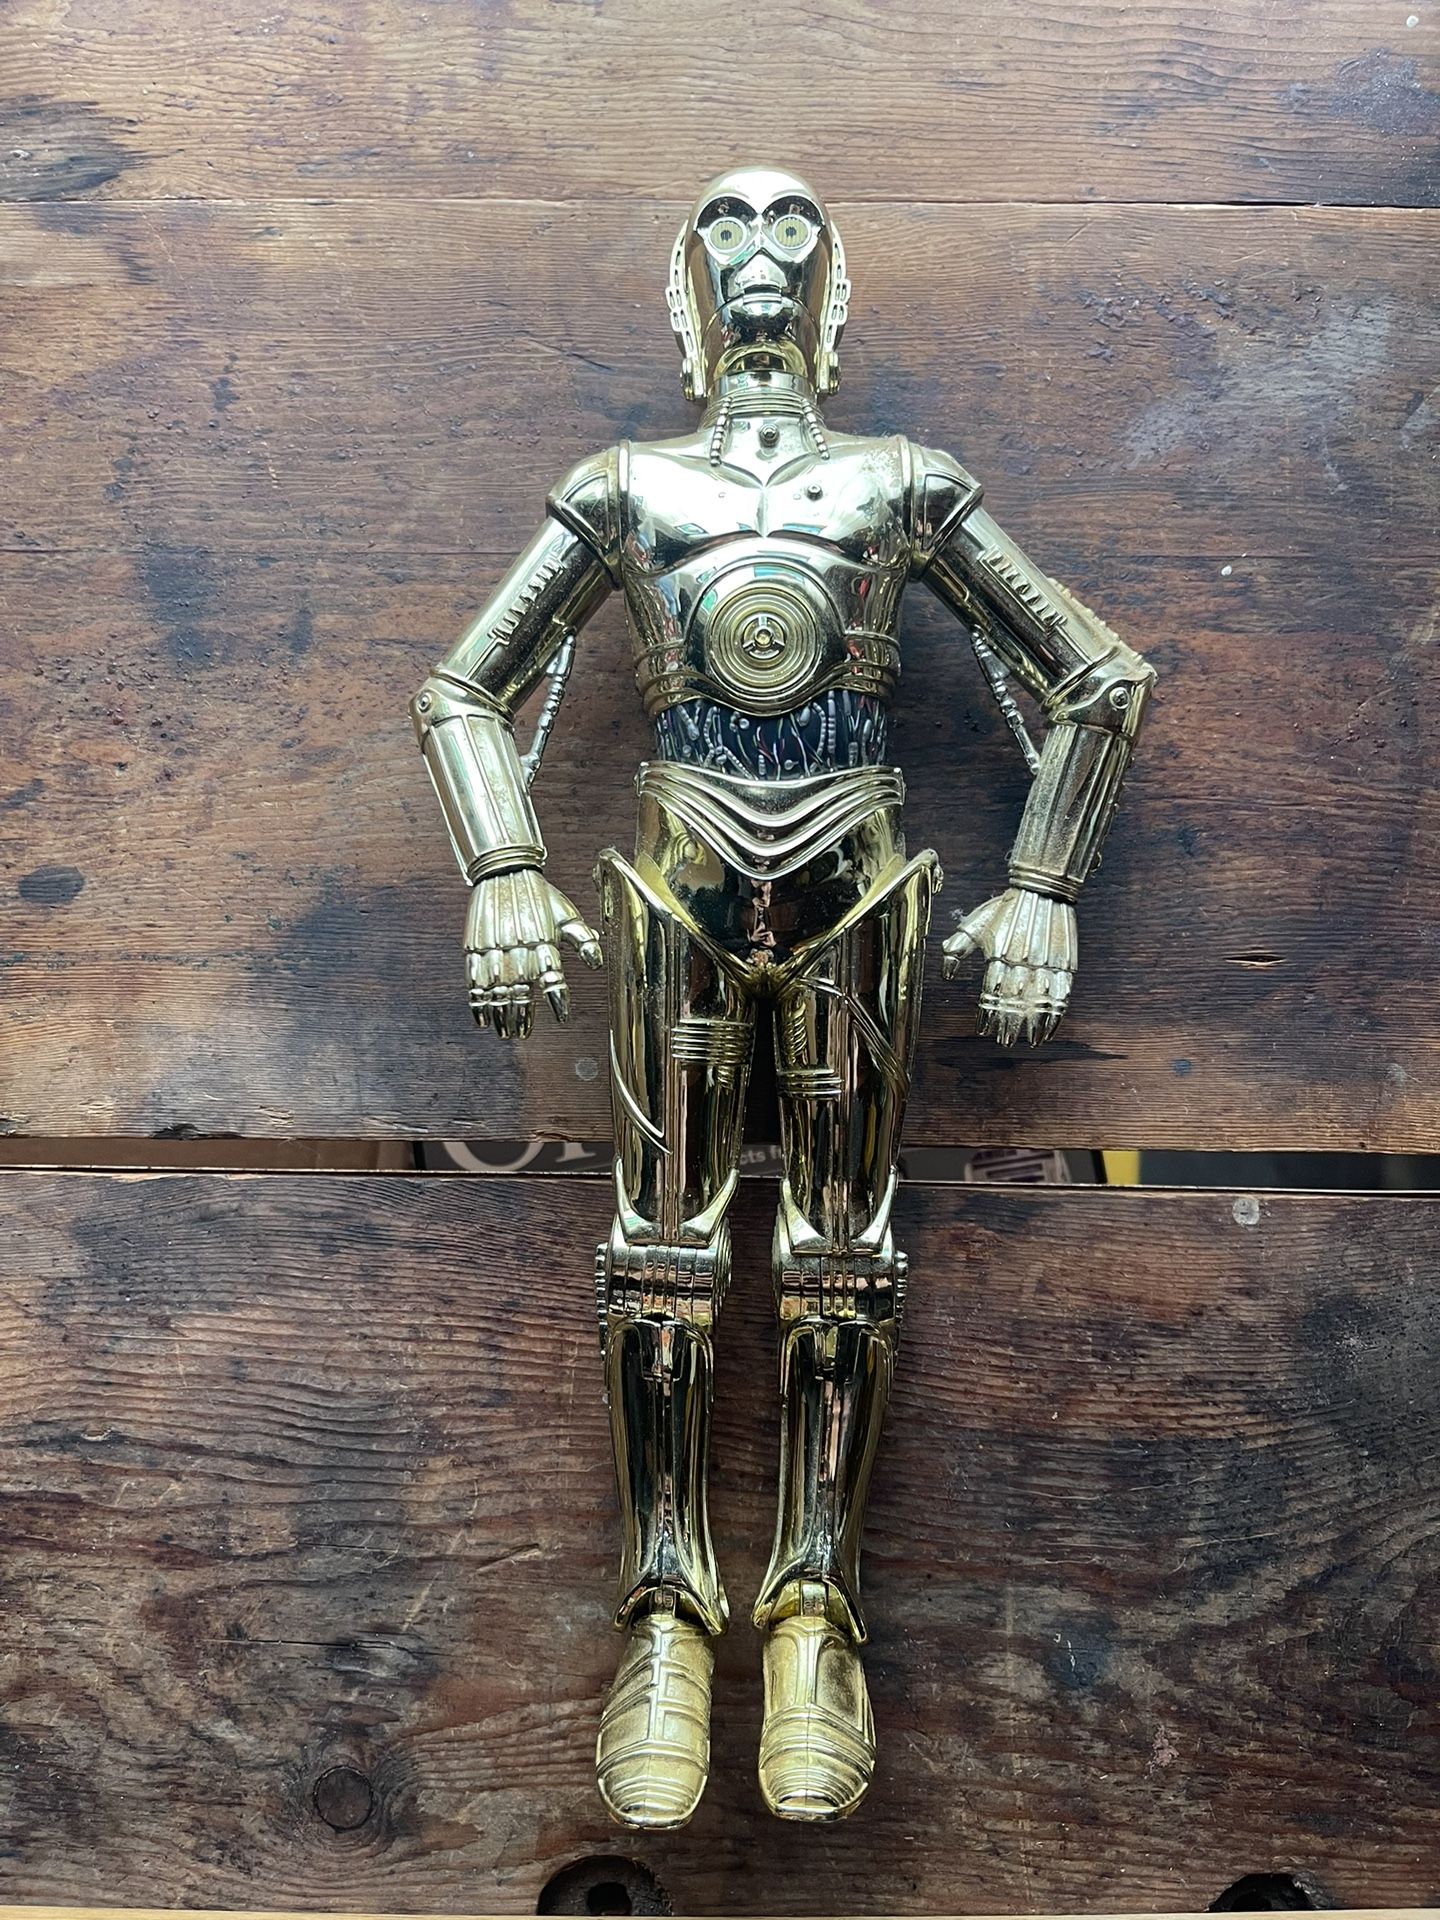 Star Wars Collector Series, 12-inch C-3PO Action Figure, Hasbro, Lucasfilm, 1997